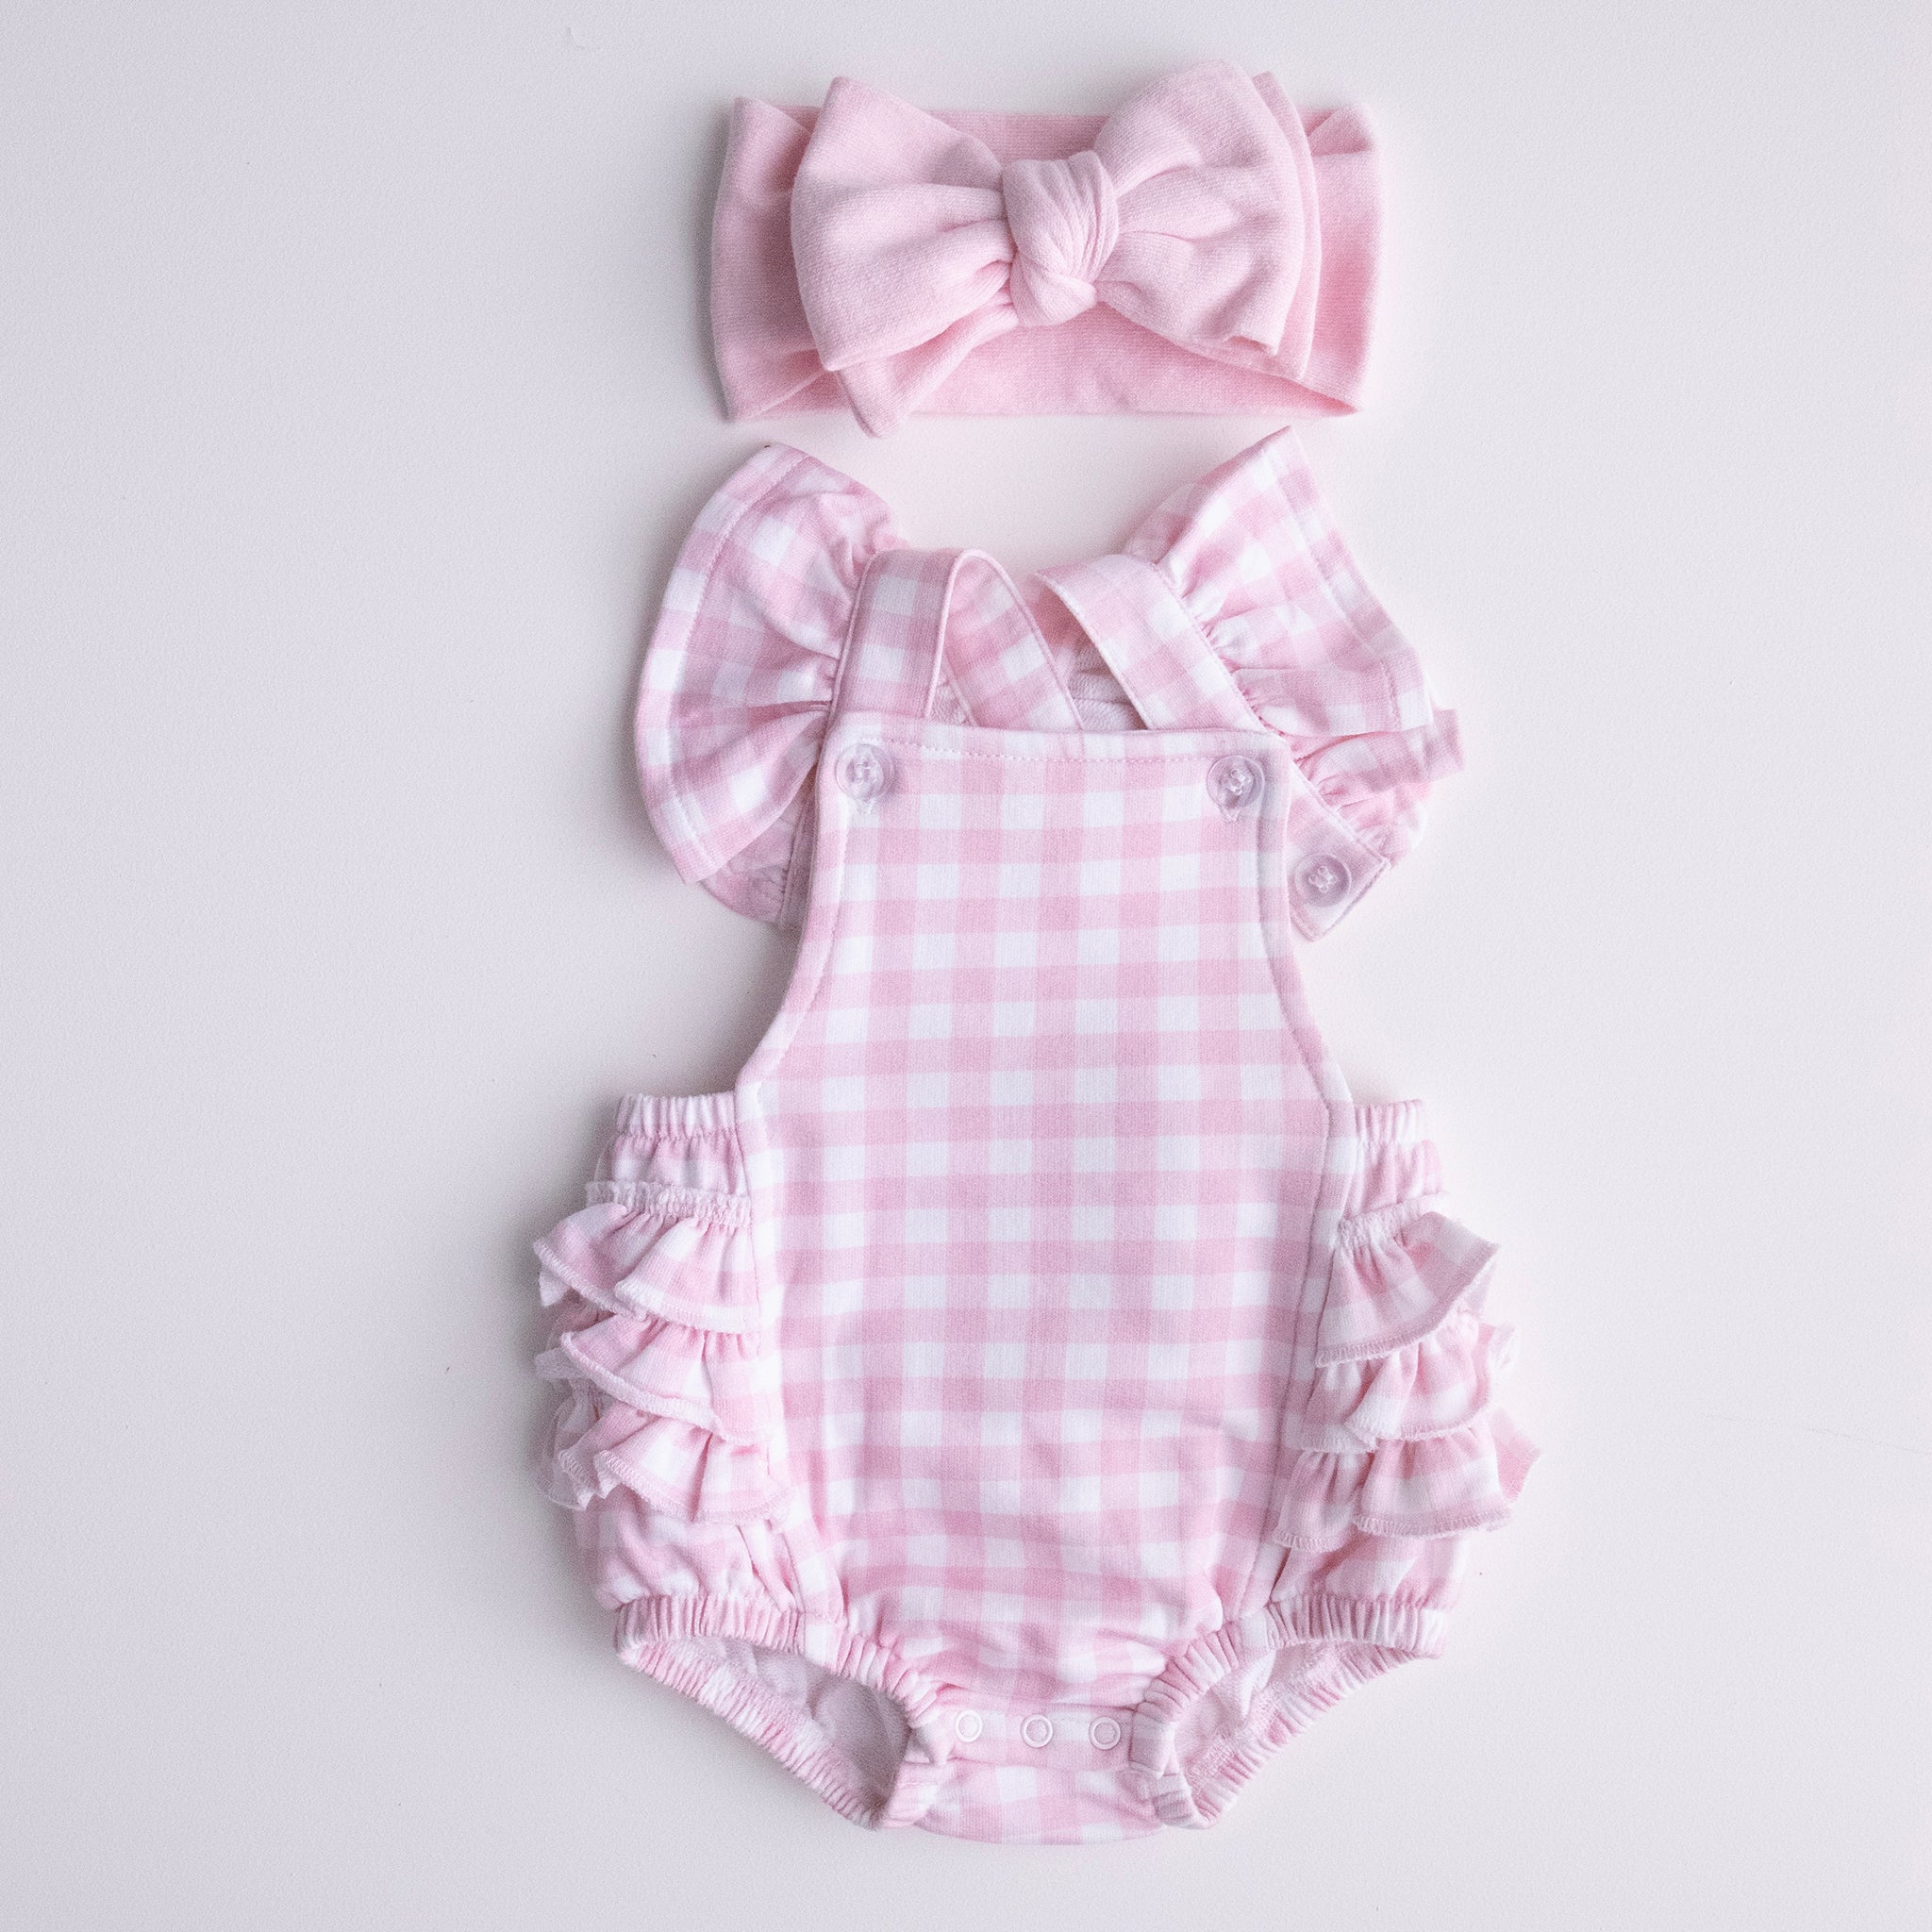 pretty pink gingham playsuit with pretty pink jacquard knit bow